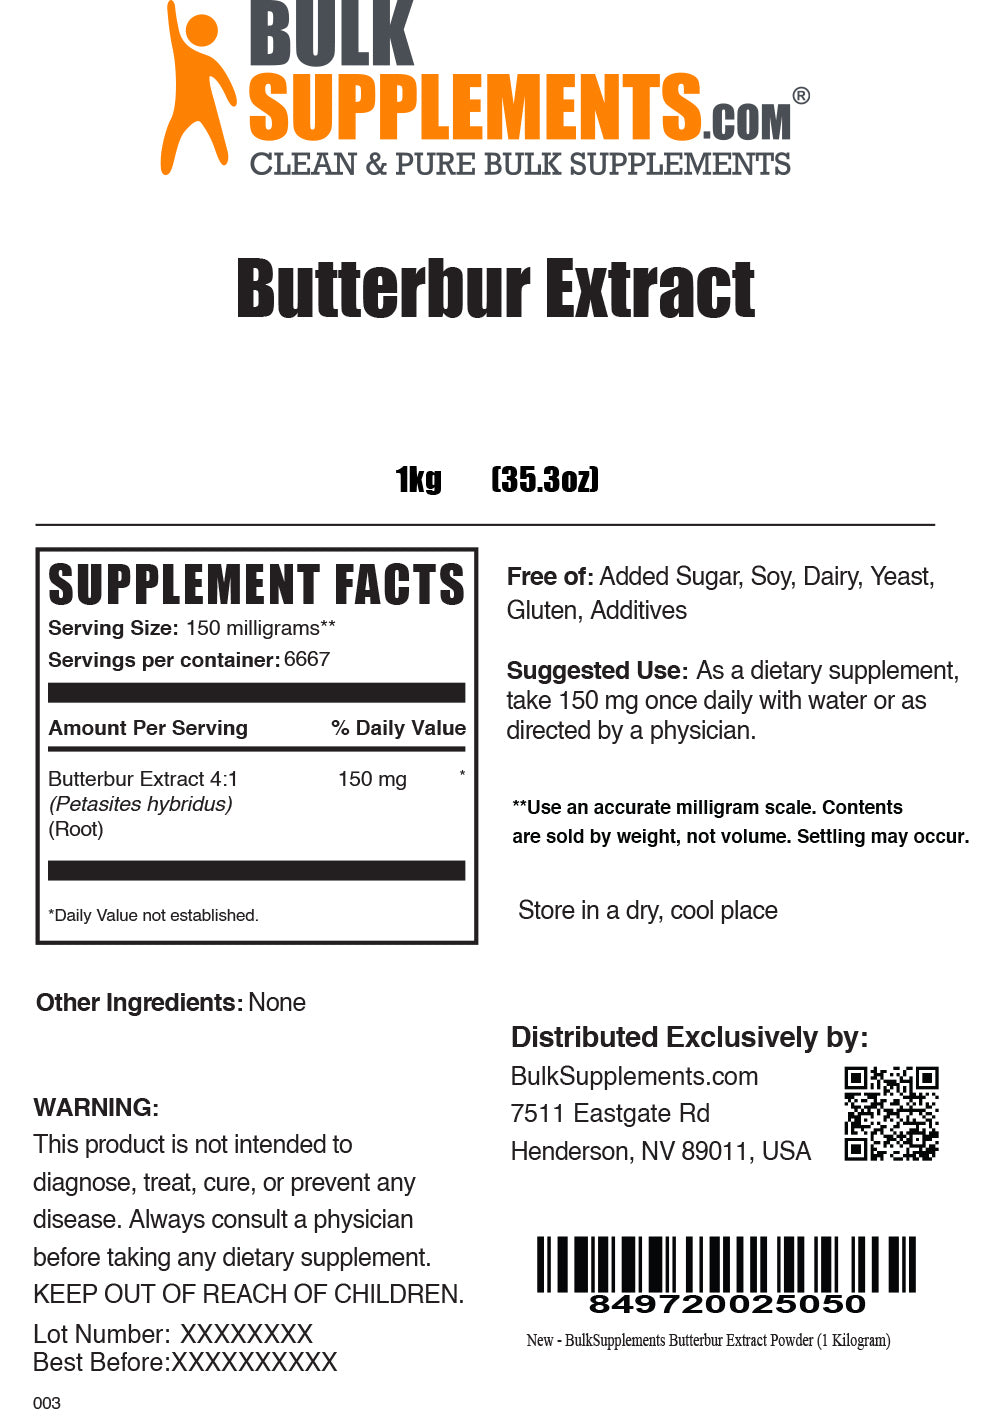 1kg of Butterbur extract supplement facts